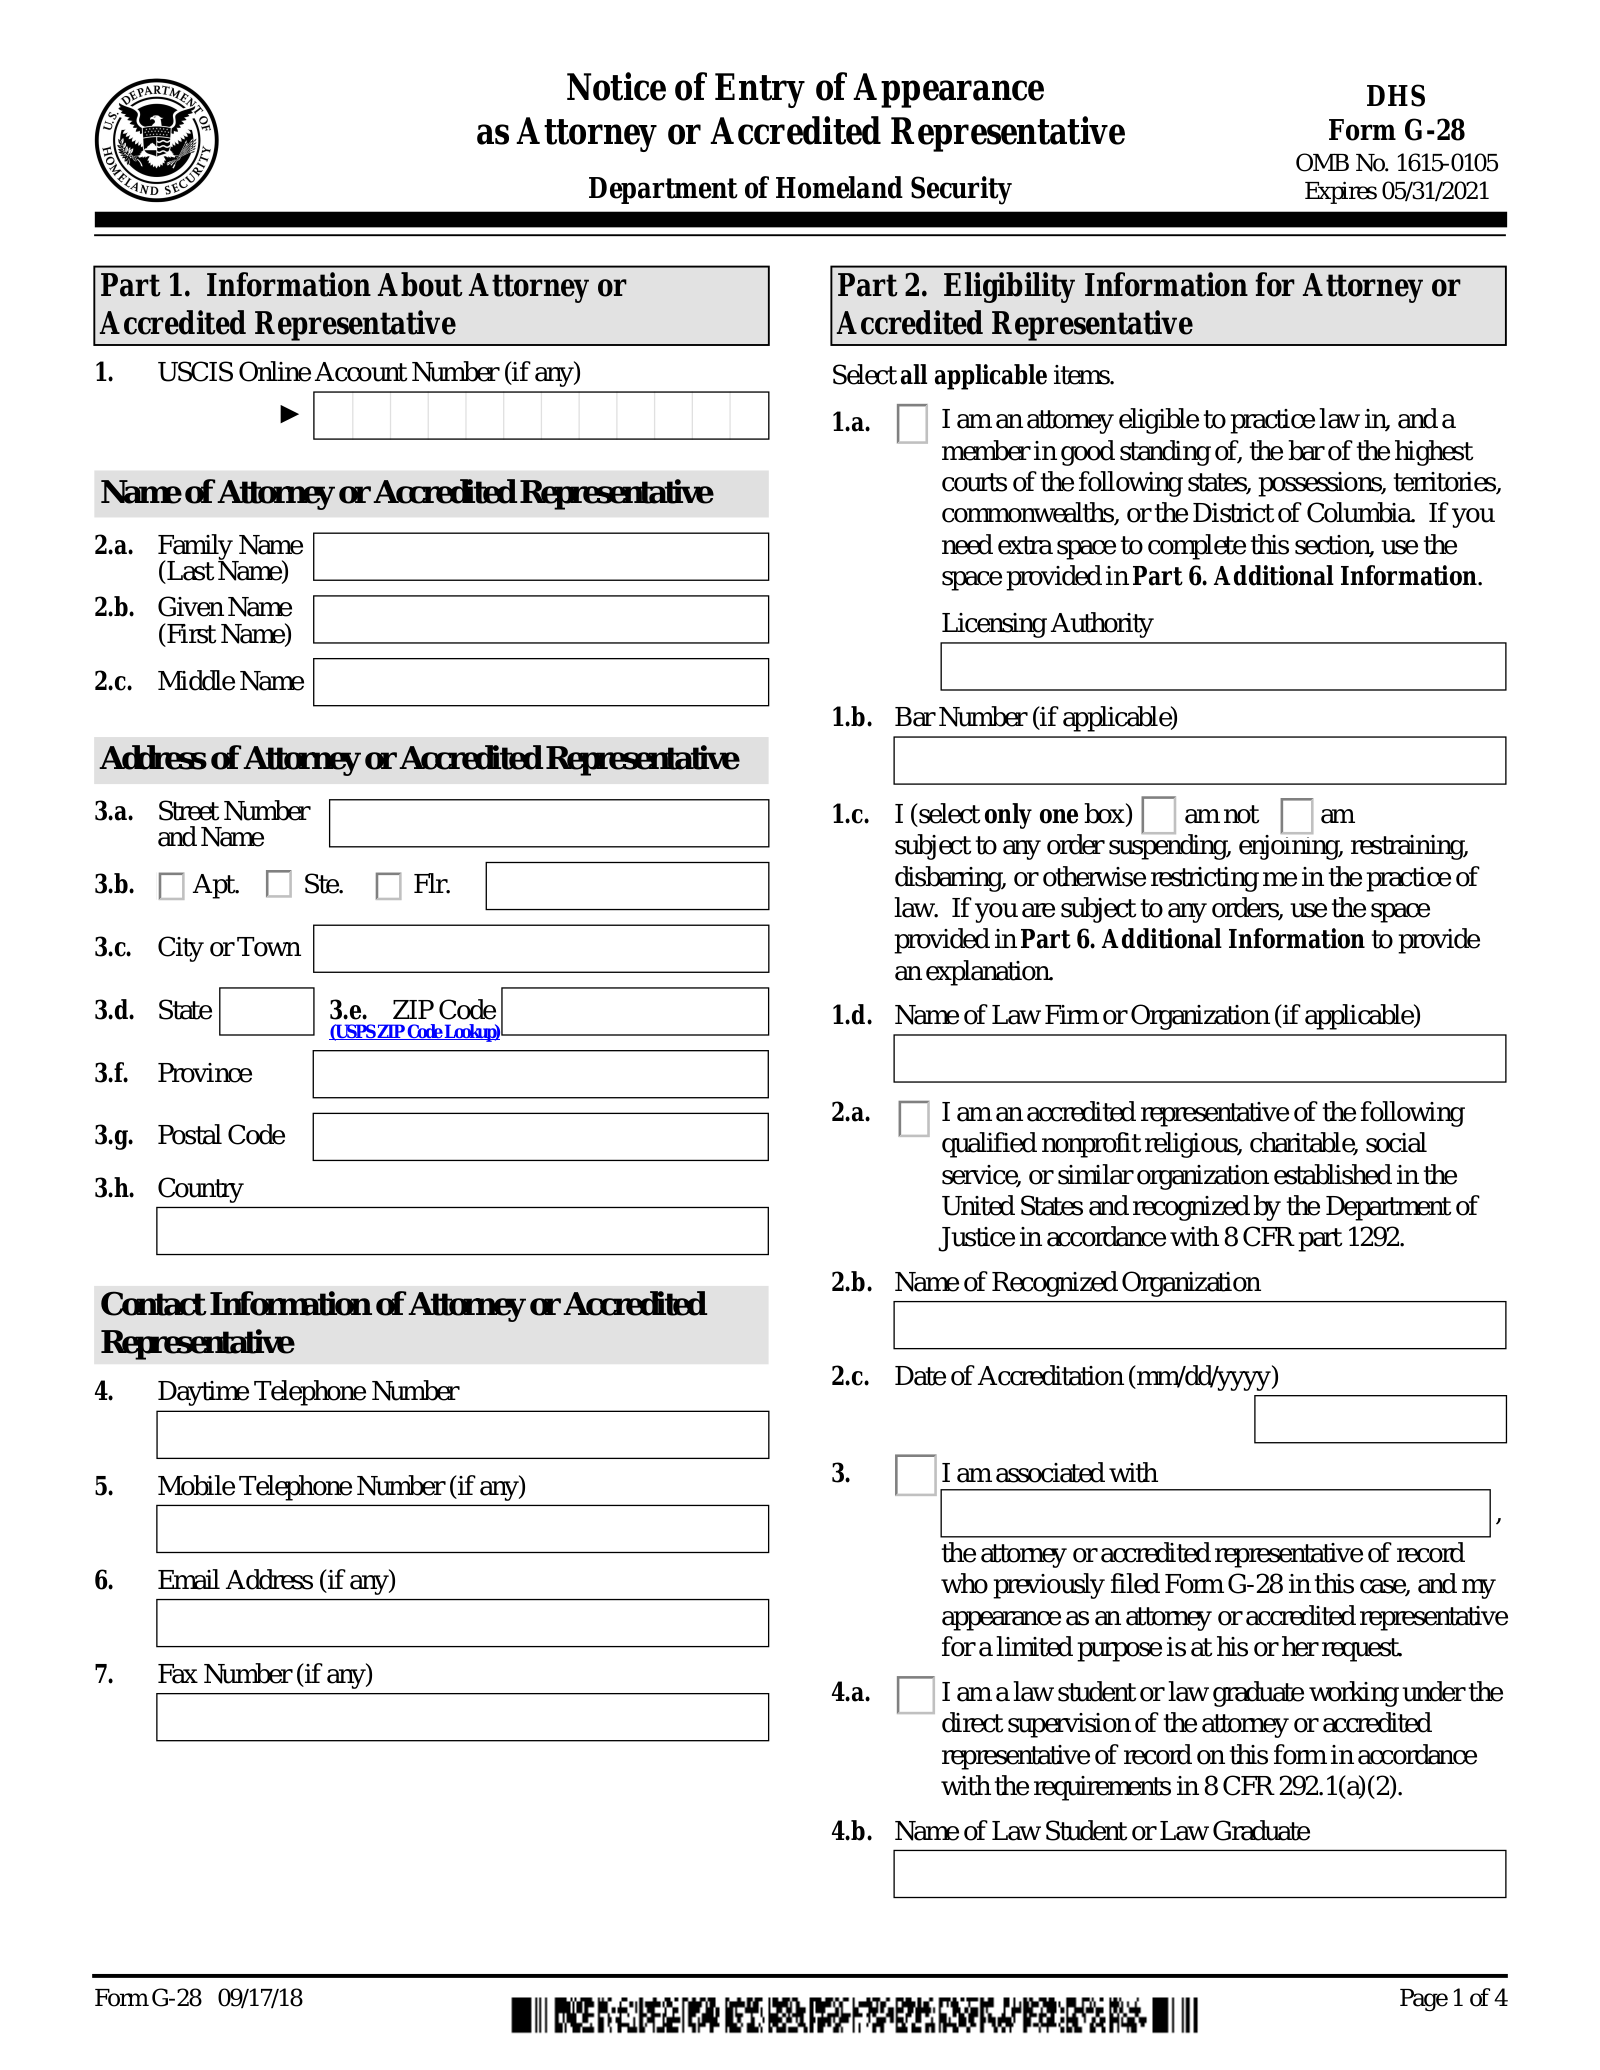 USCIS Form G-28 | Notice of Entry of Appearance